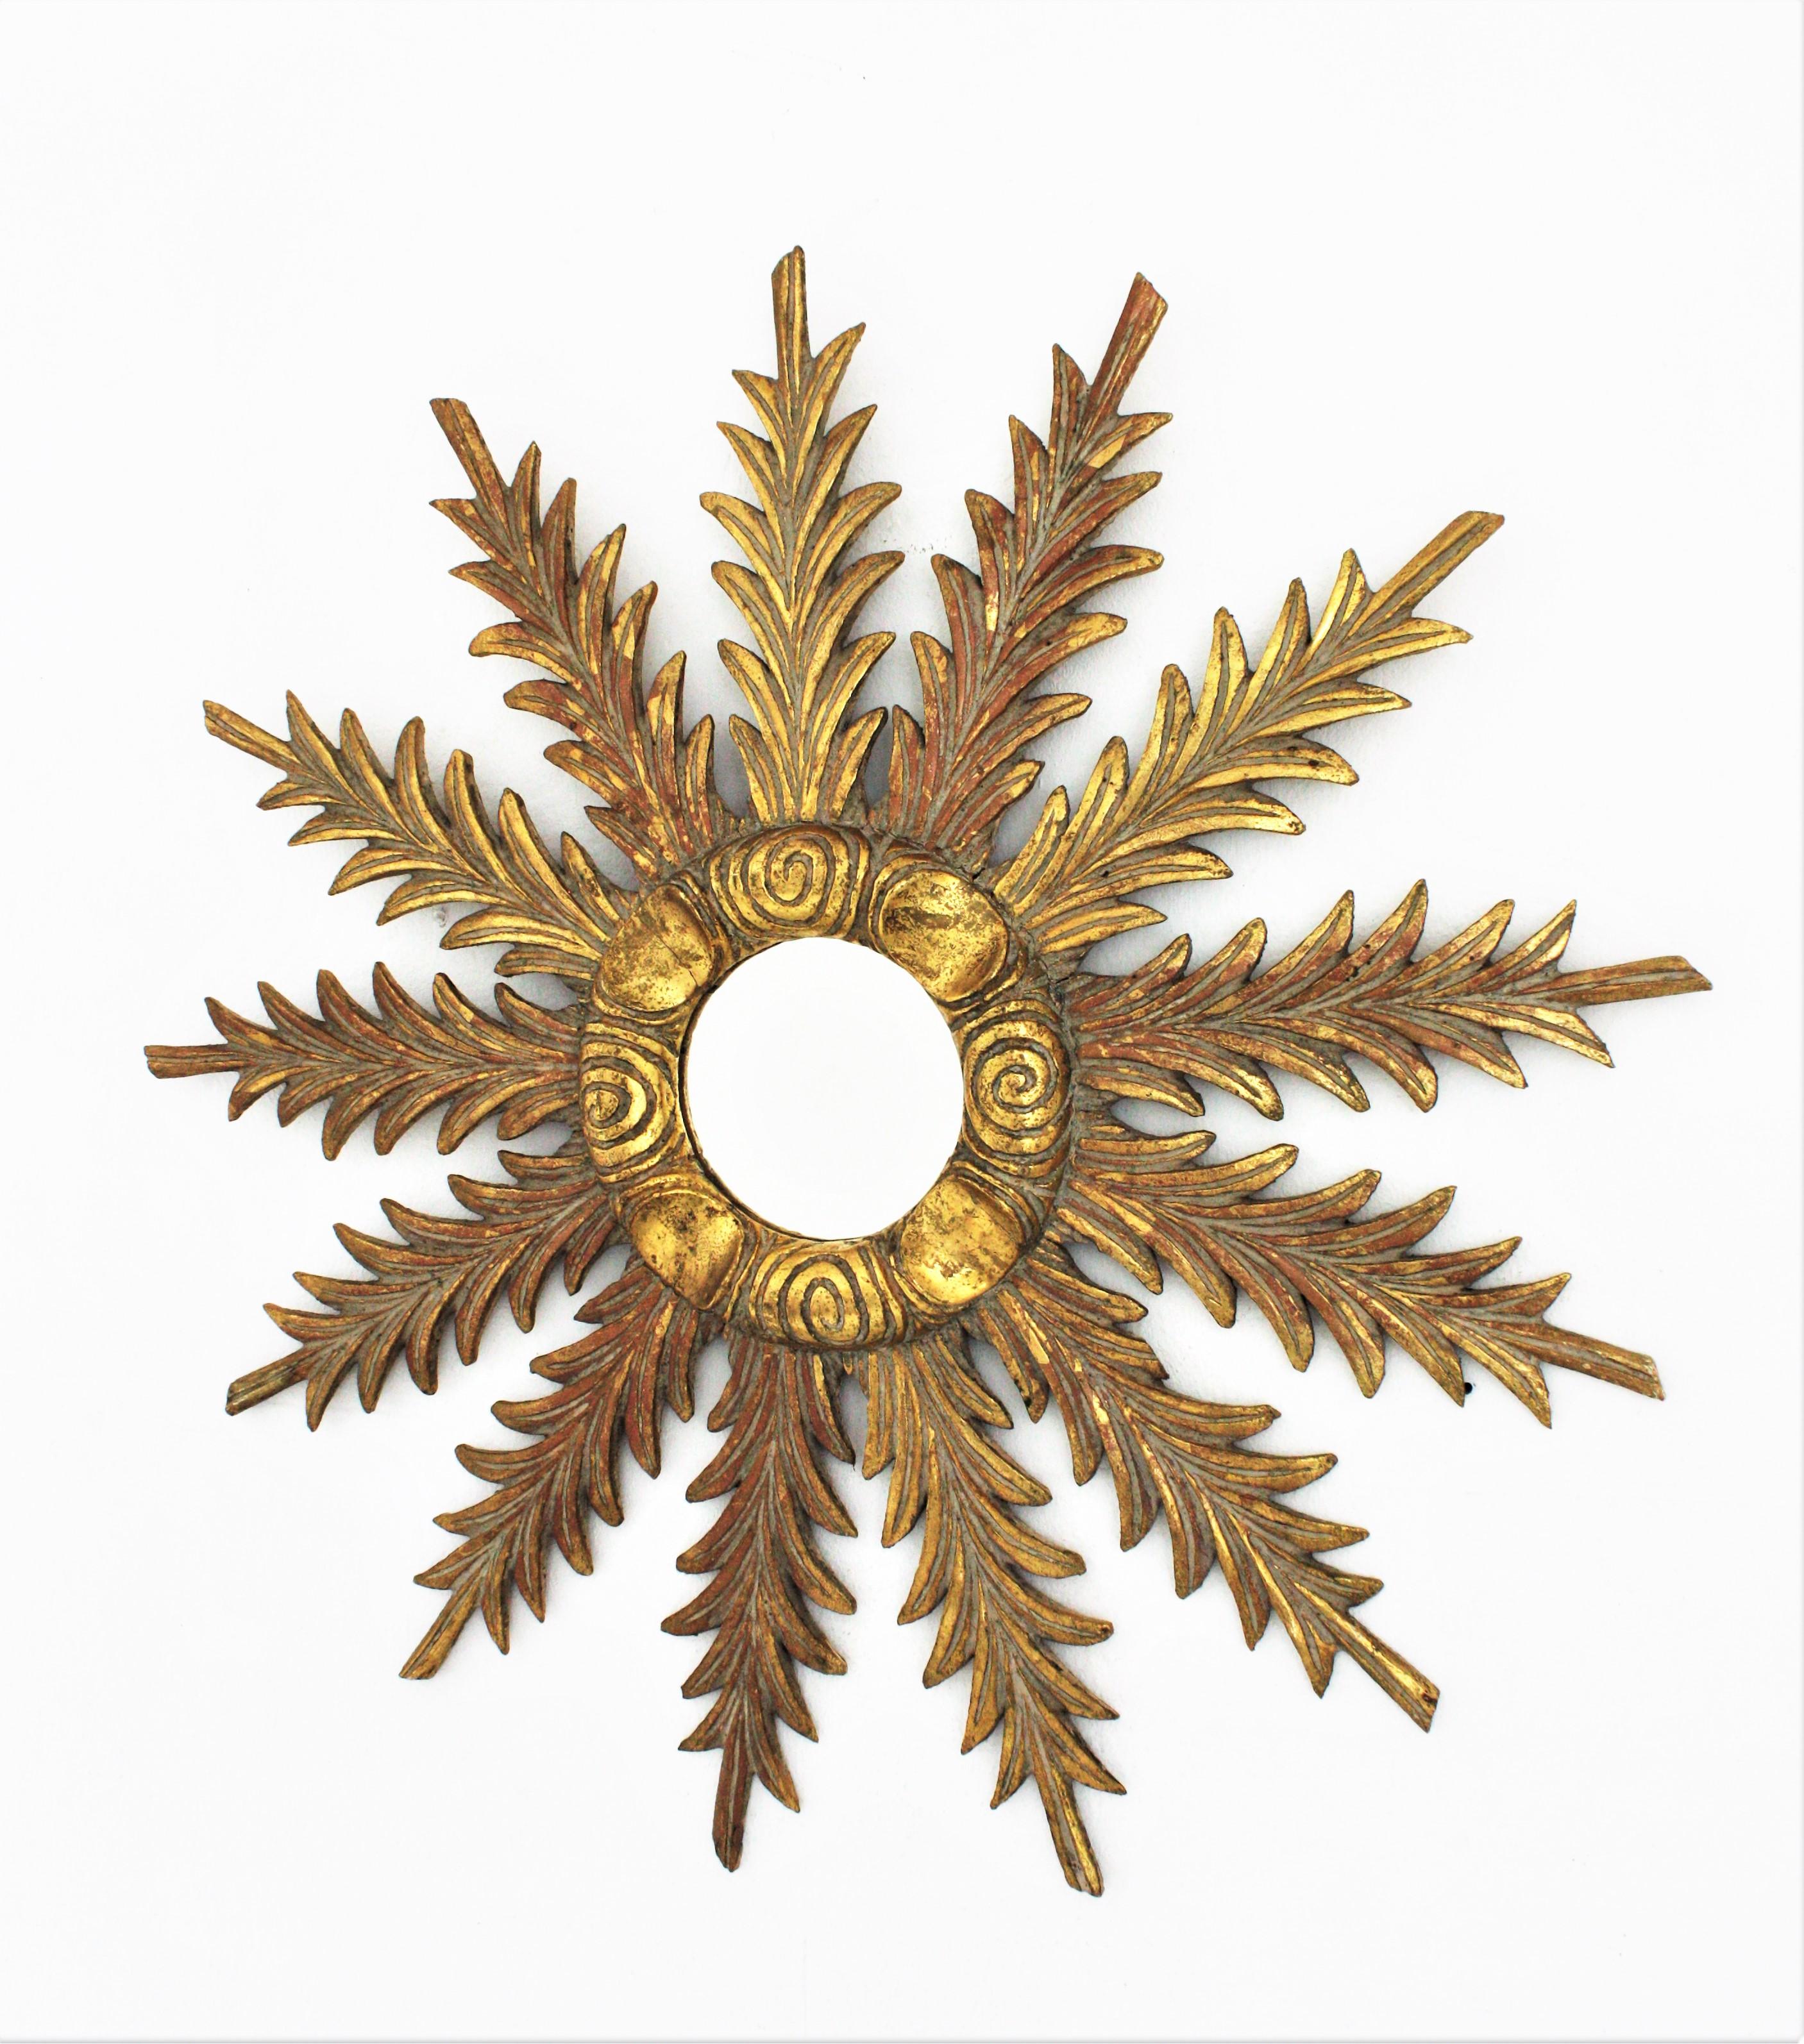 Sunburst Starburst Giltwood Mirror with Foliage Carvings, 1940s For Sale 1